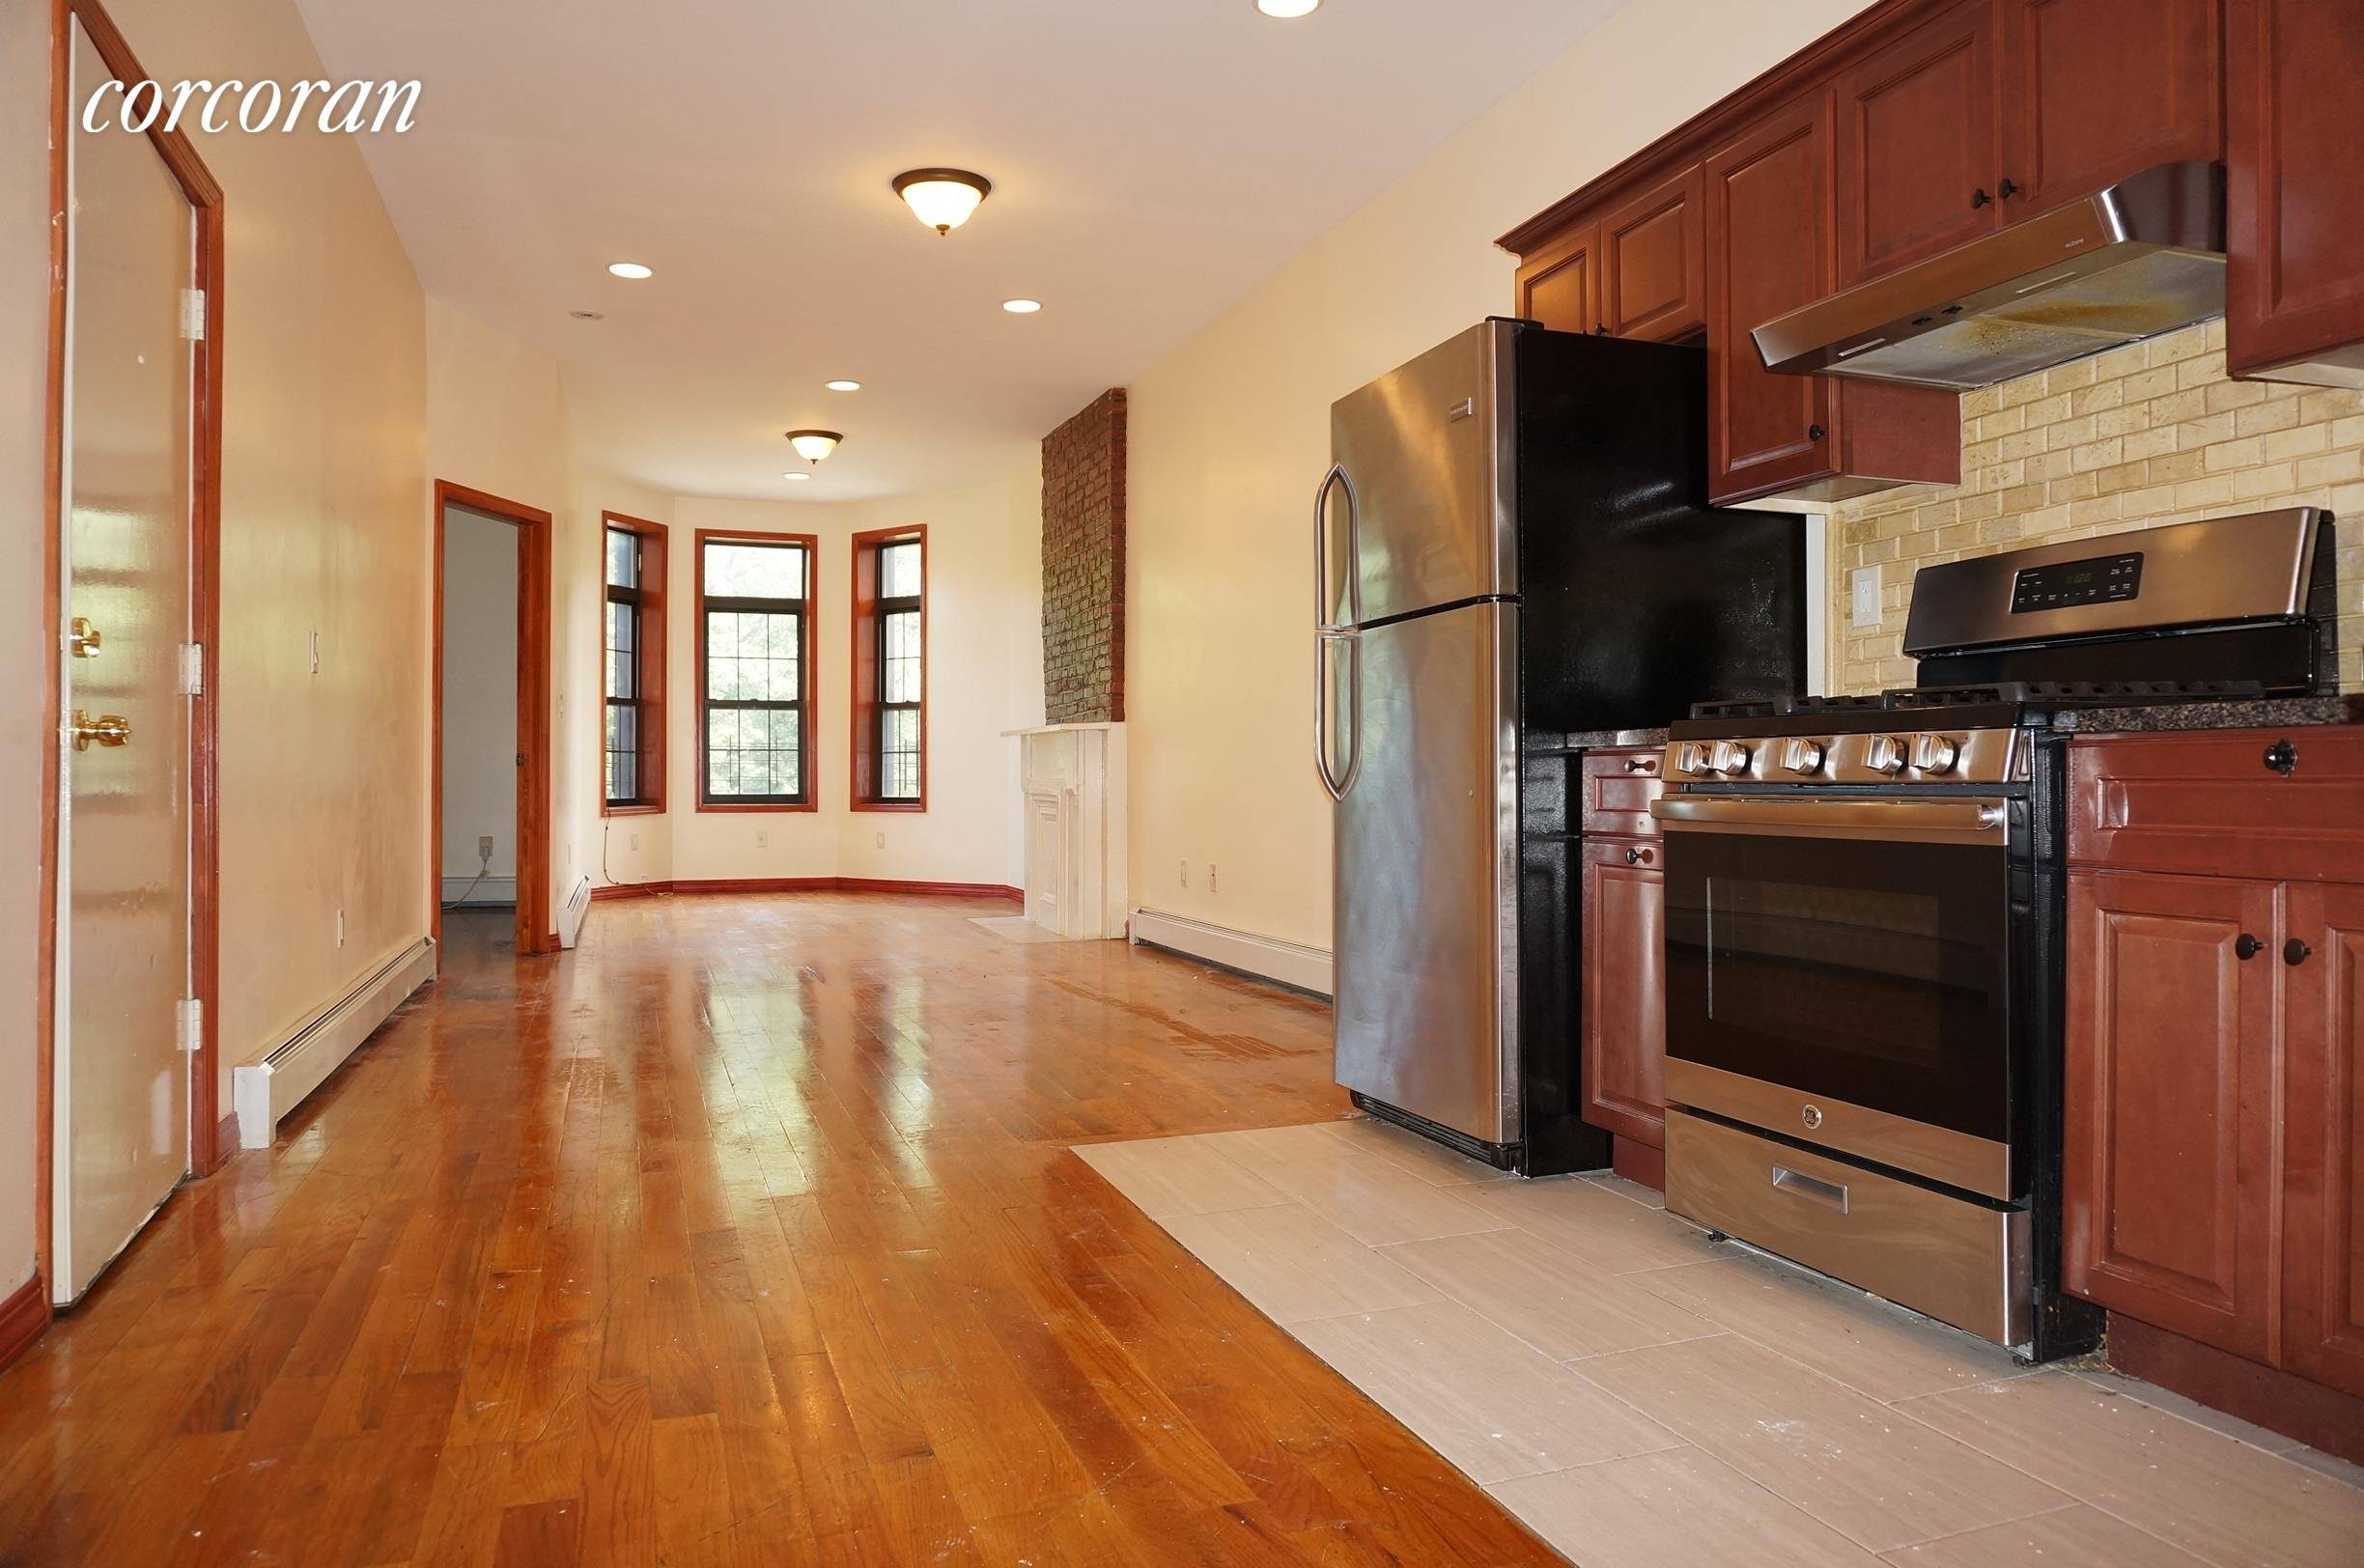 NO FEE HUGE 3BED 1BATH Bed Stuy apartment with beautiful views of Saratoga Park across the street.